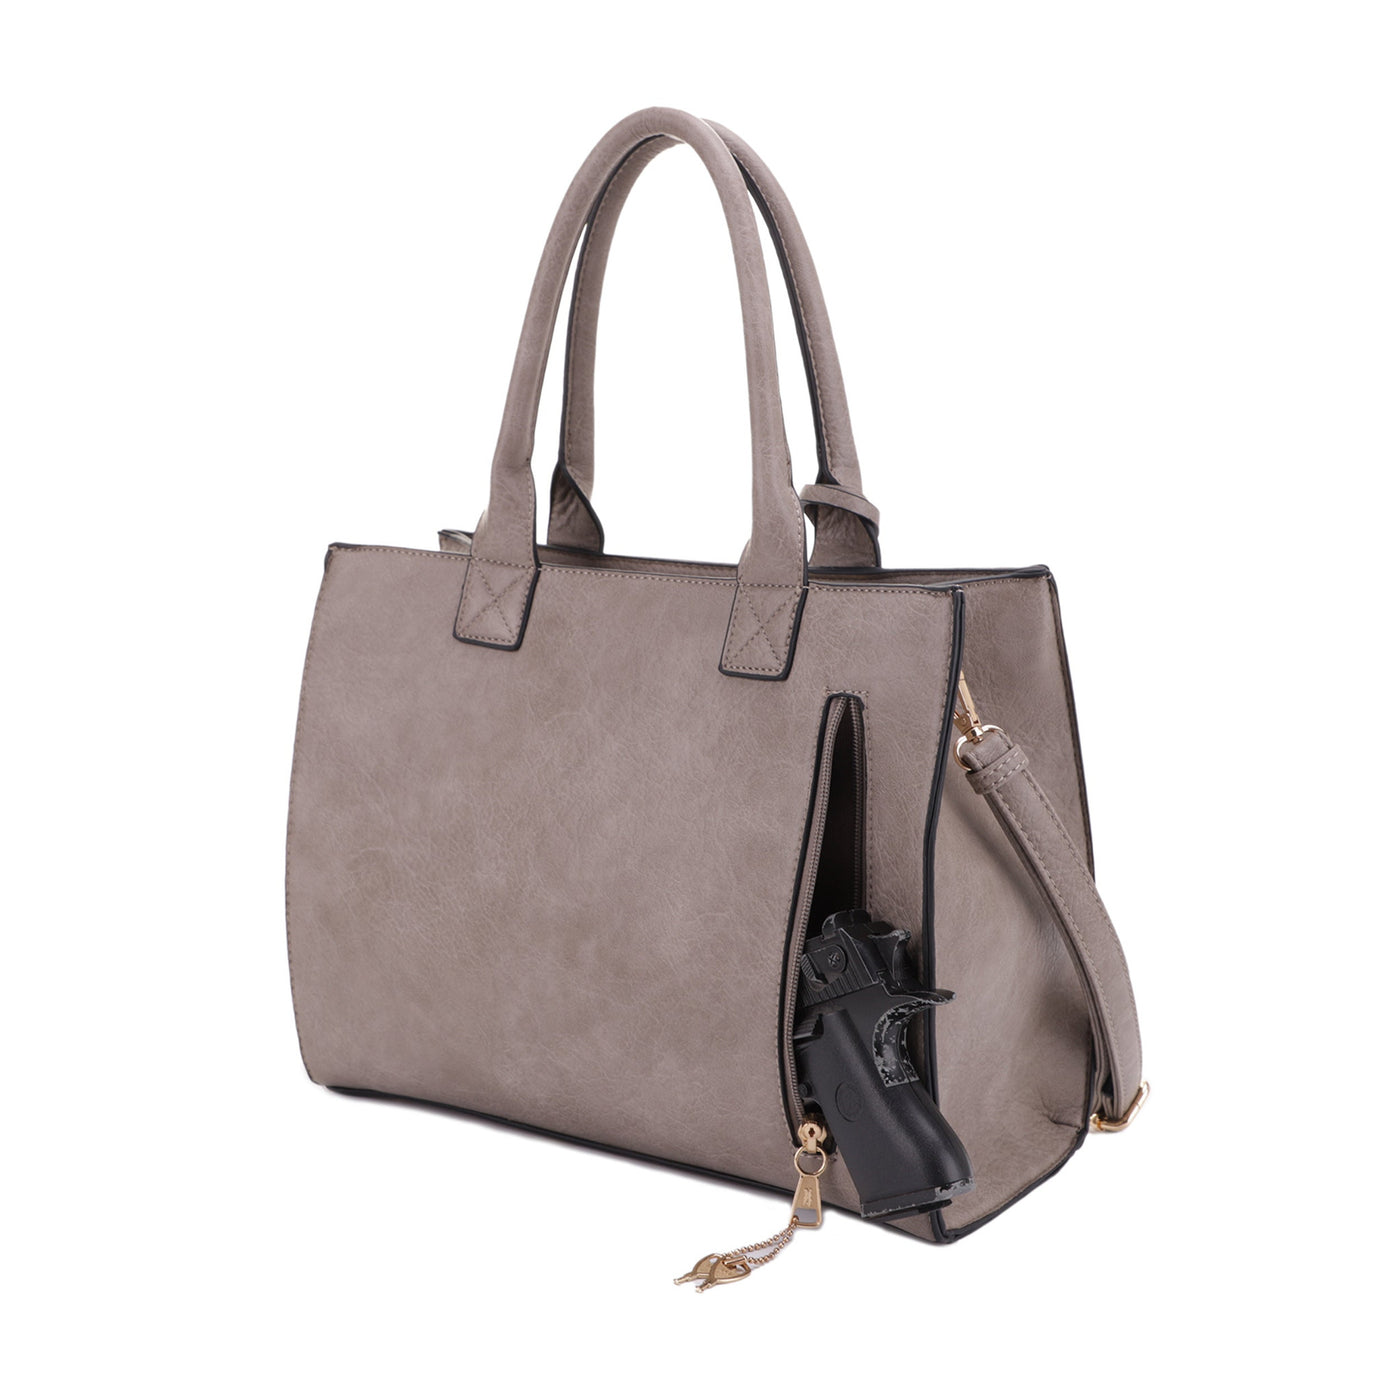 Kate Concealed Carry Lock and Key Satchel with Coin Pouch